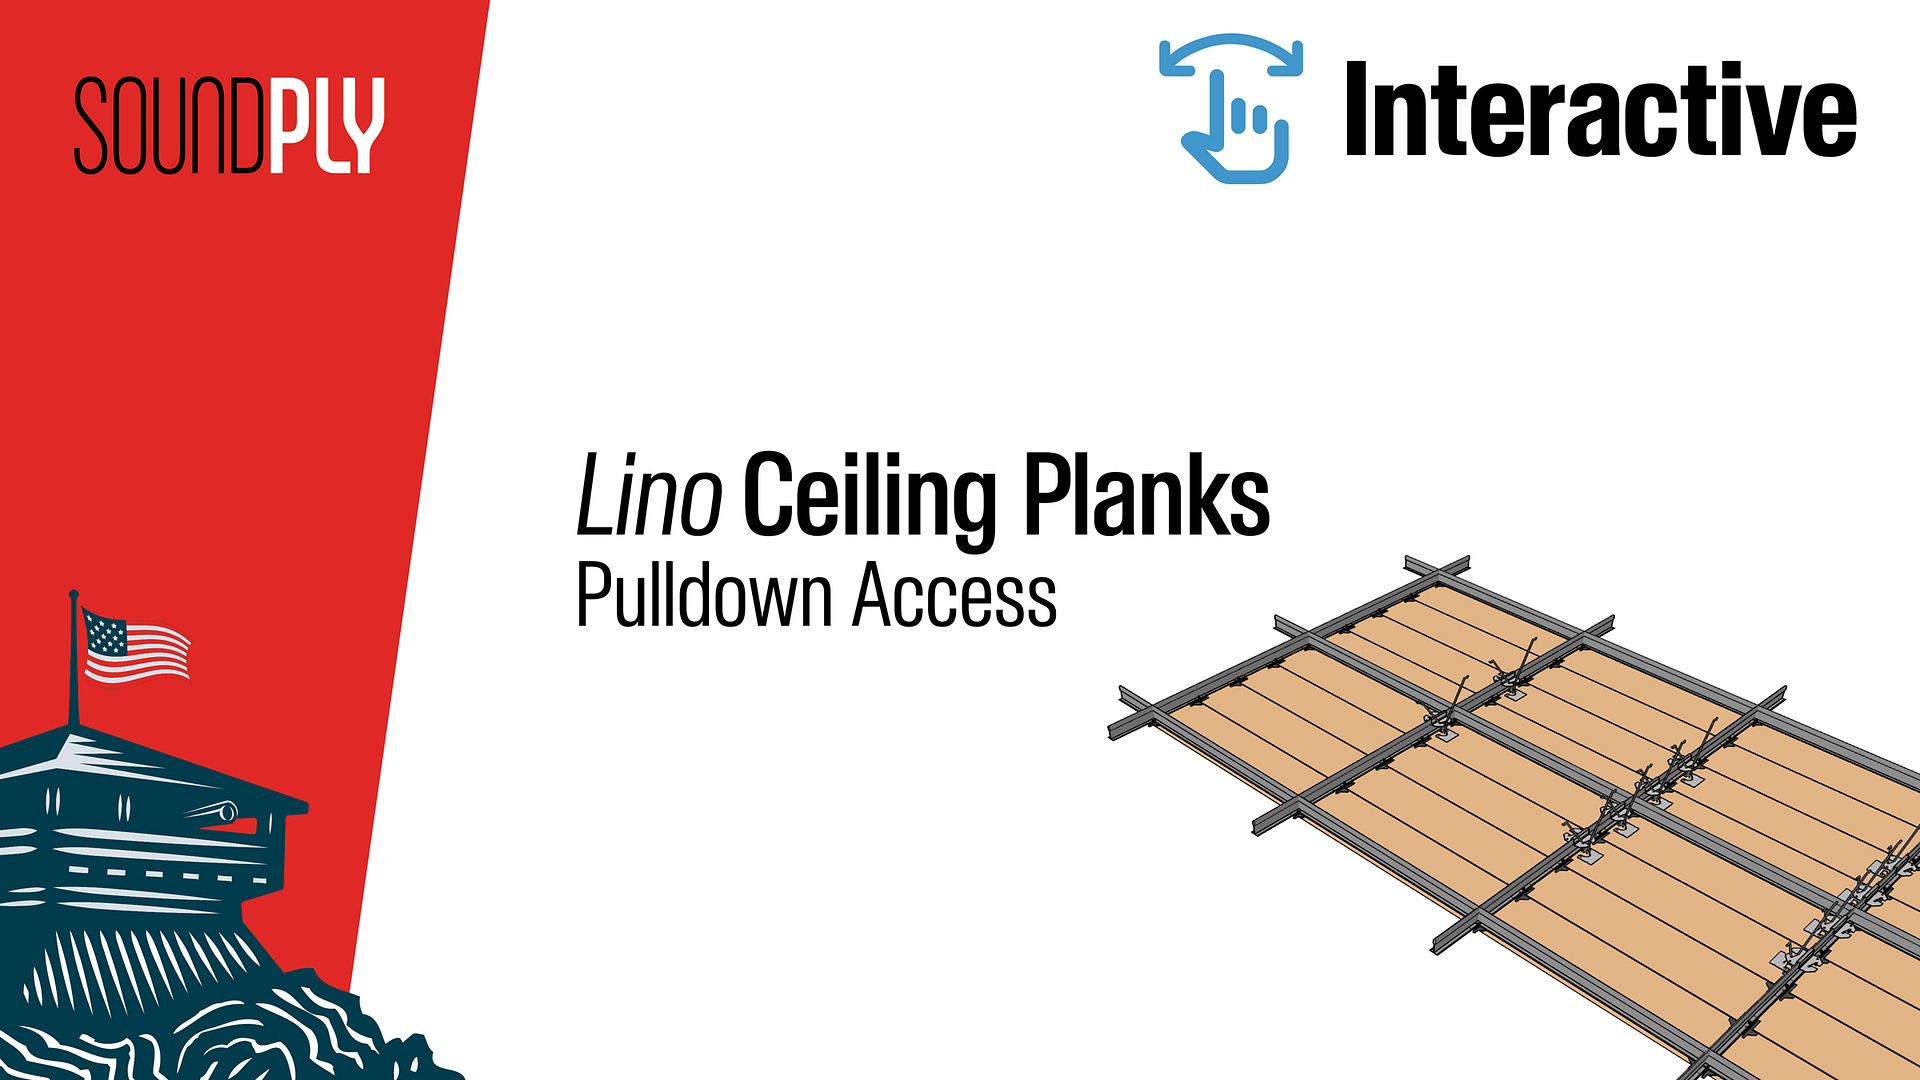 SoundPly Interactive Install Instructions - Lino Planks Pulldown Access